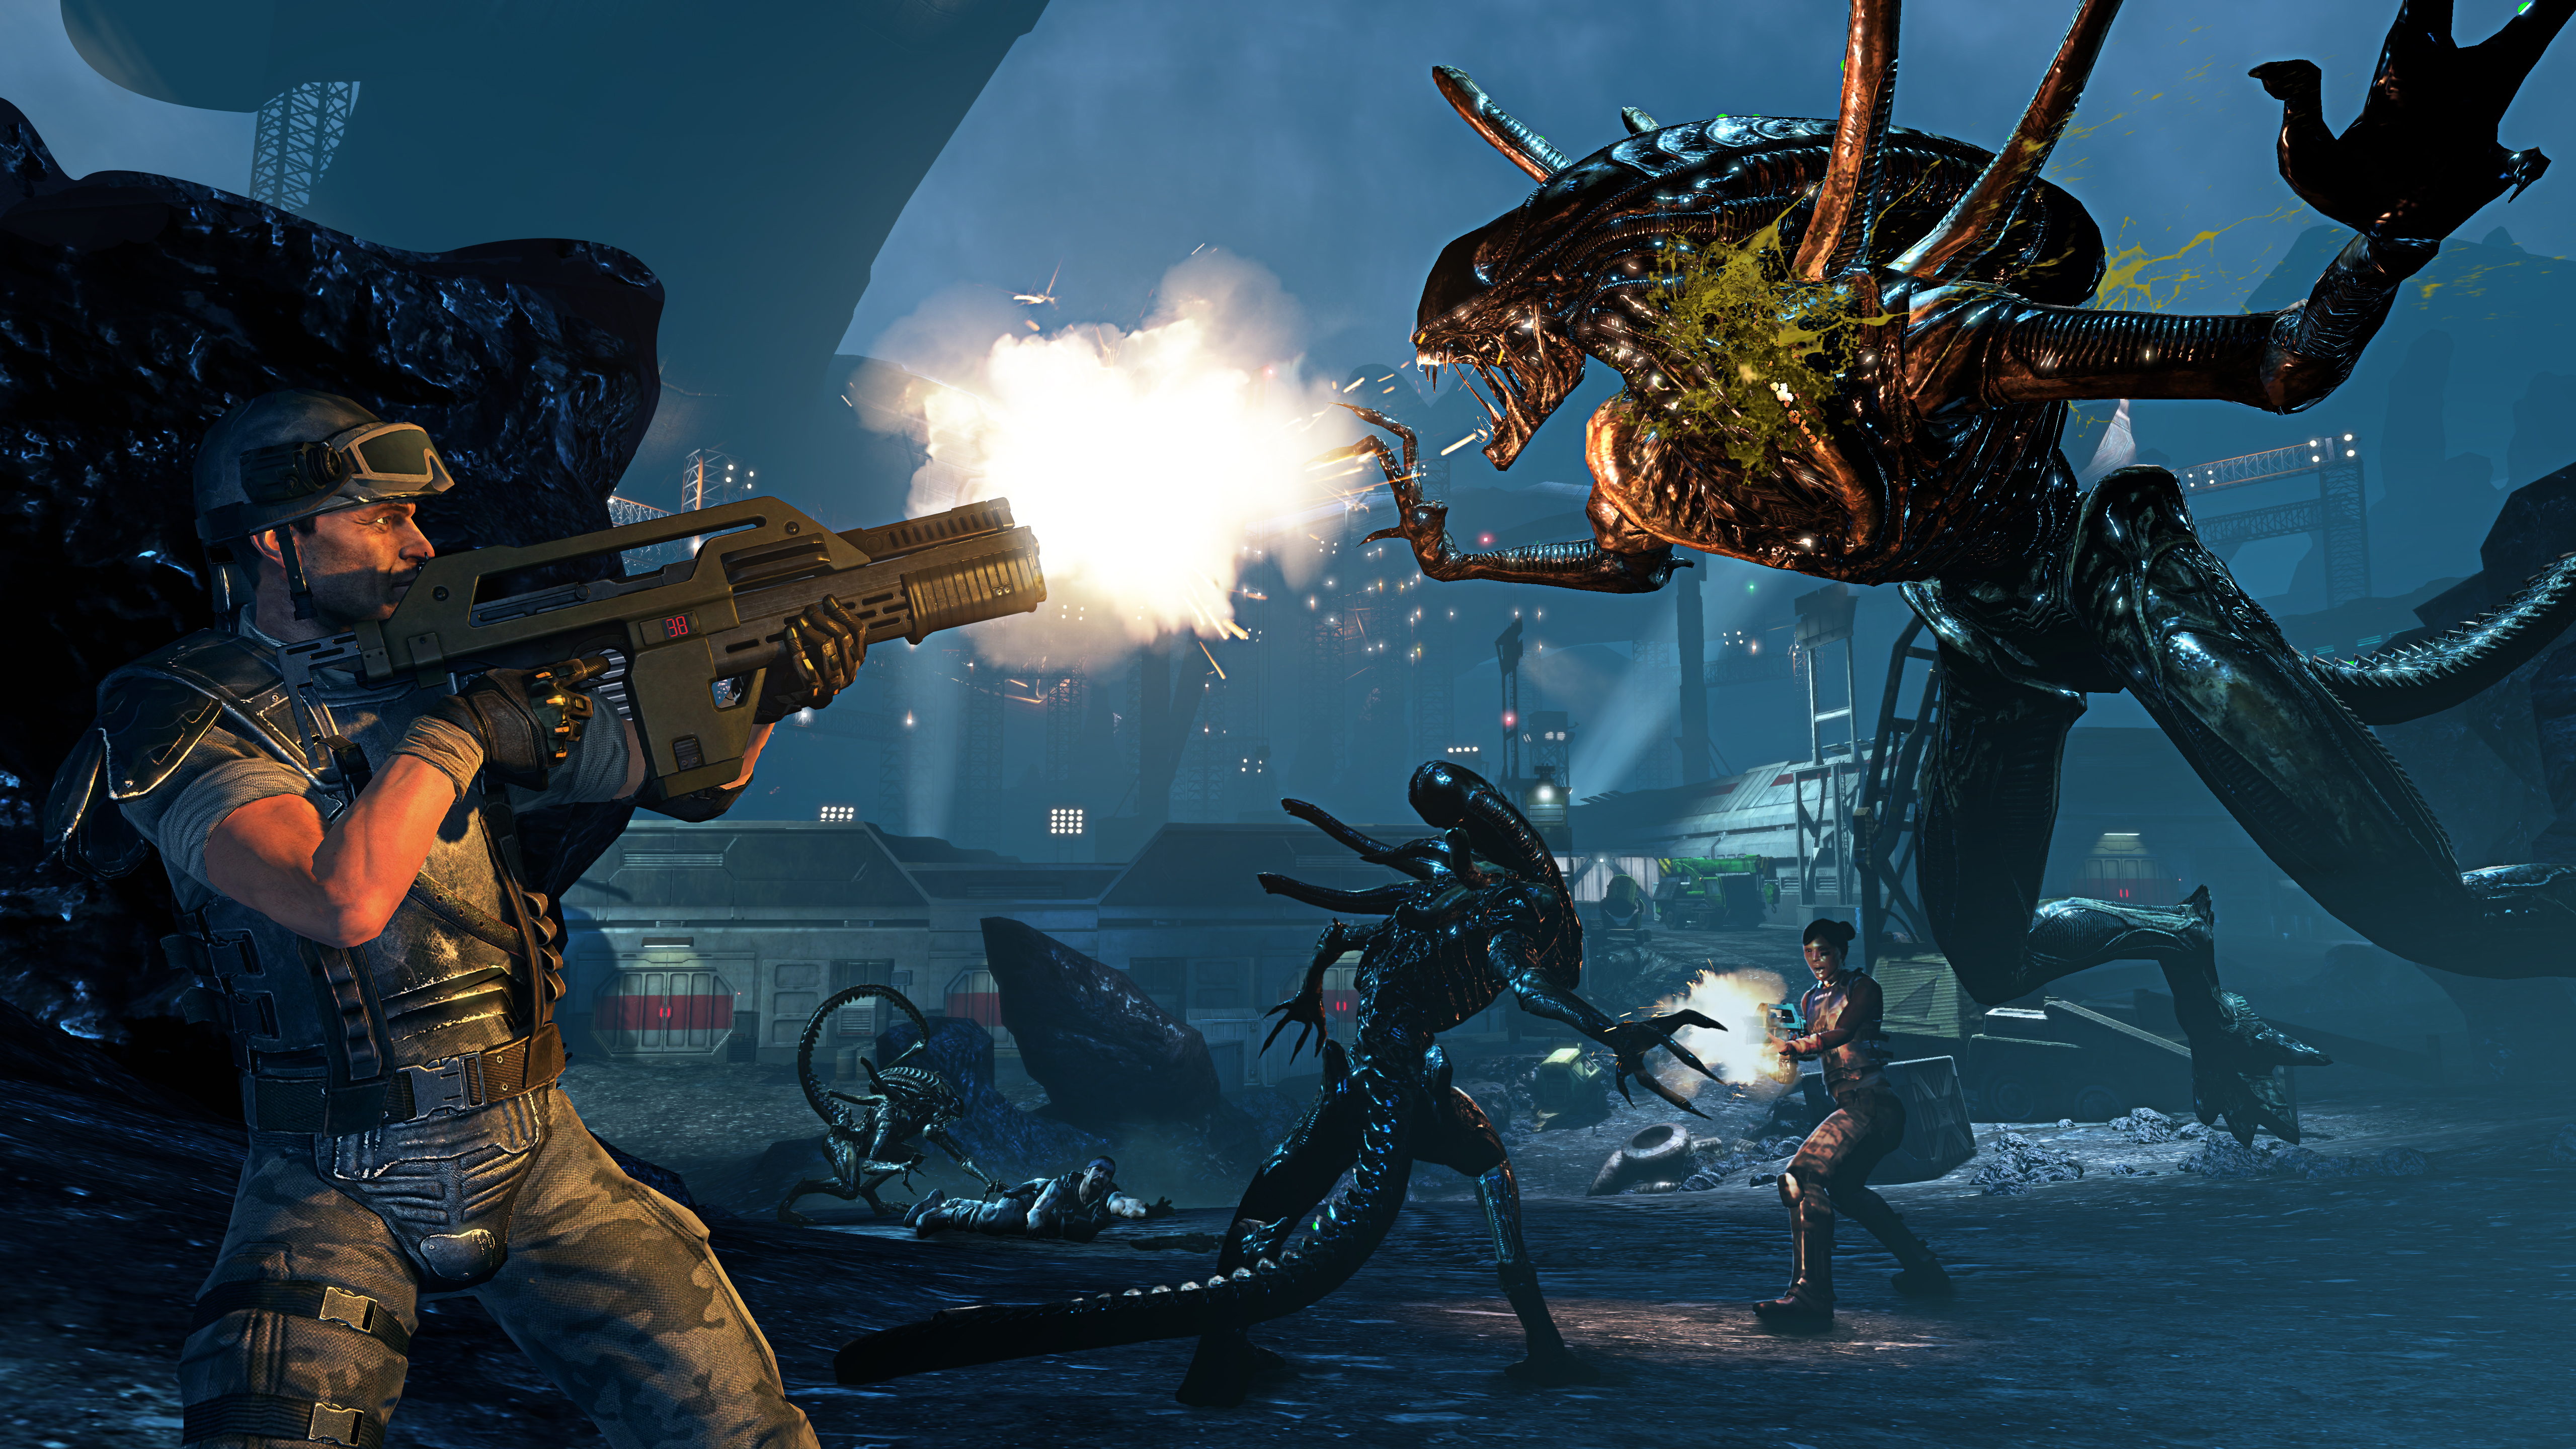 Video Game Aliens: Colonial Marines HD Wallpaper | Background Image